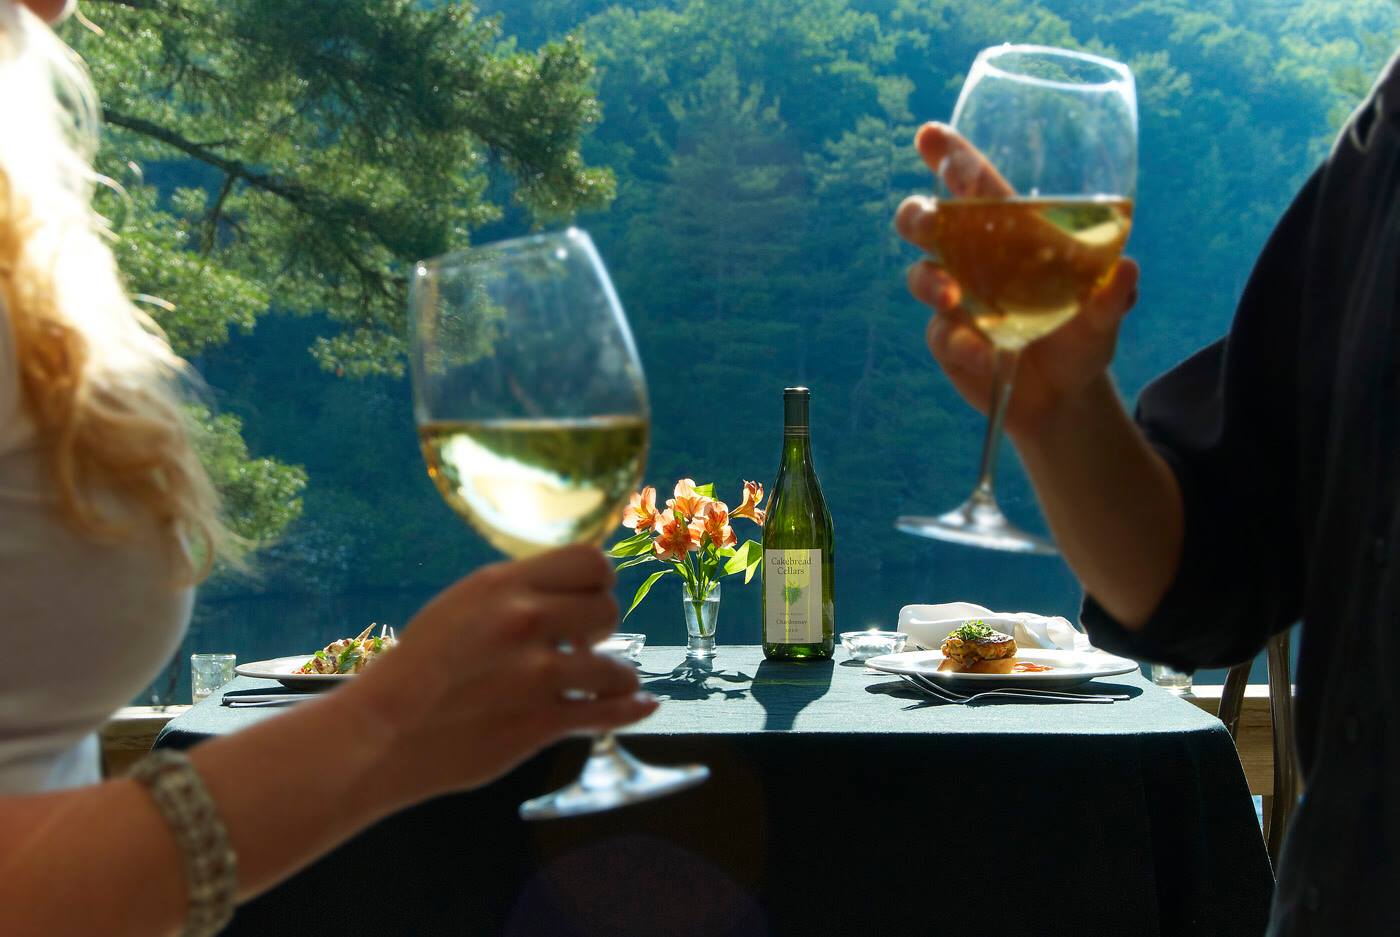 dining in the great smoky mountains of NC